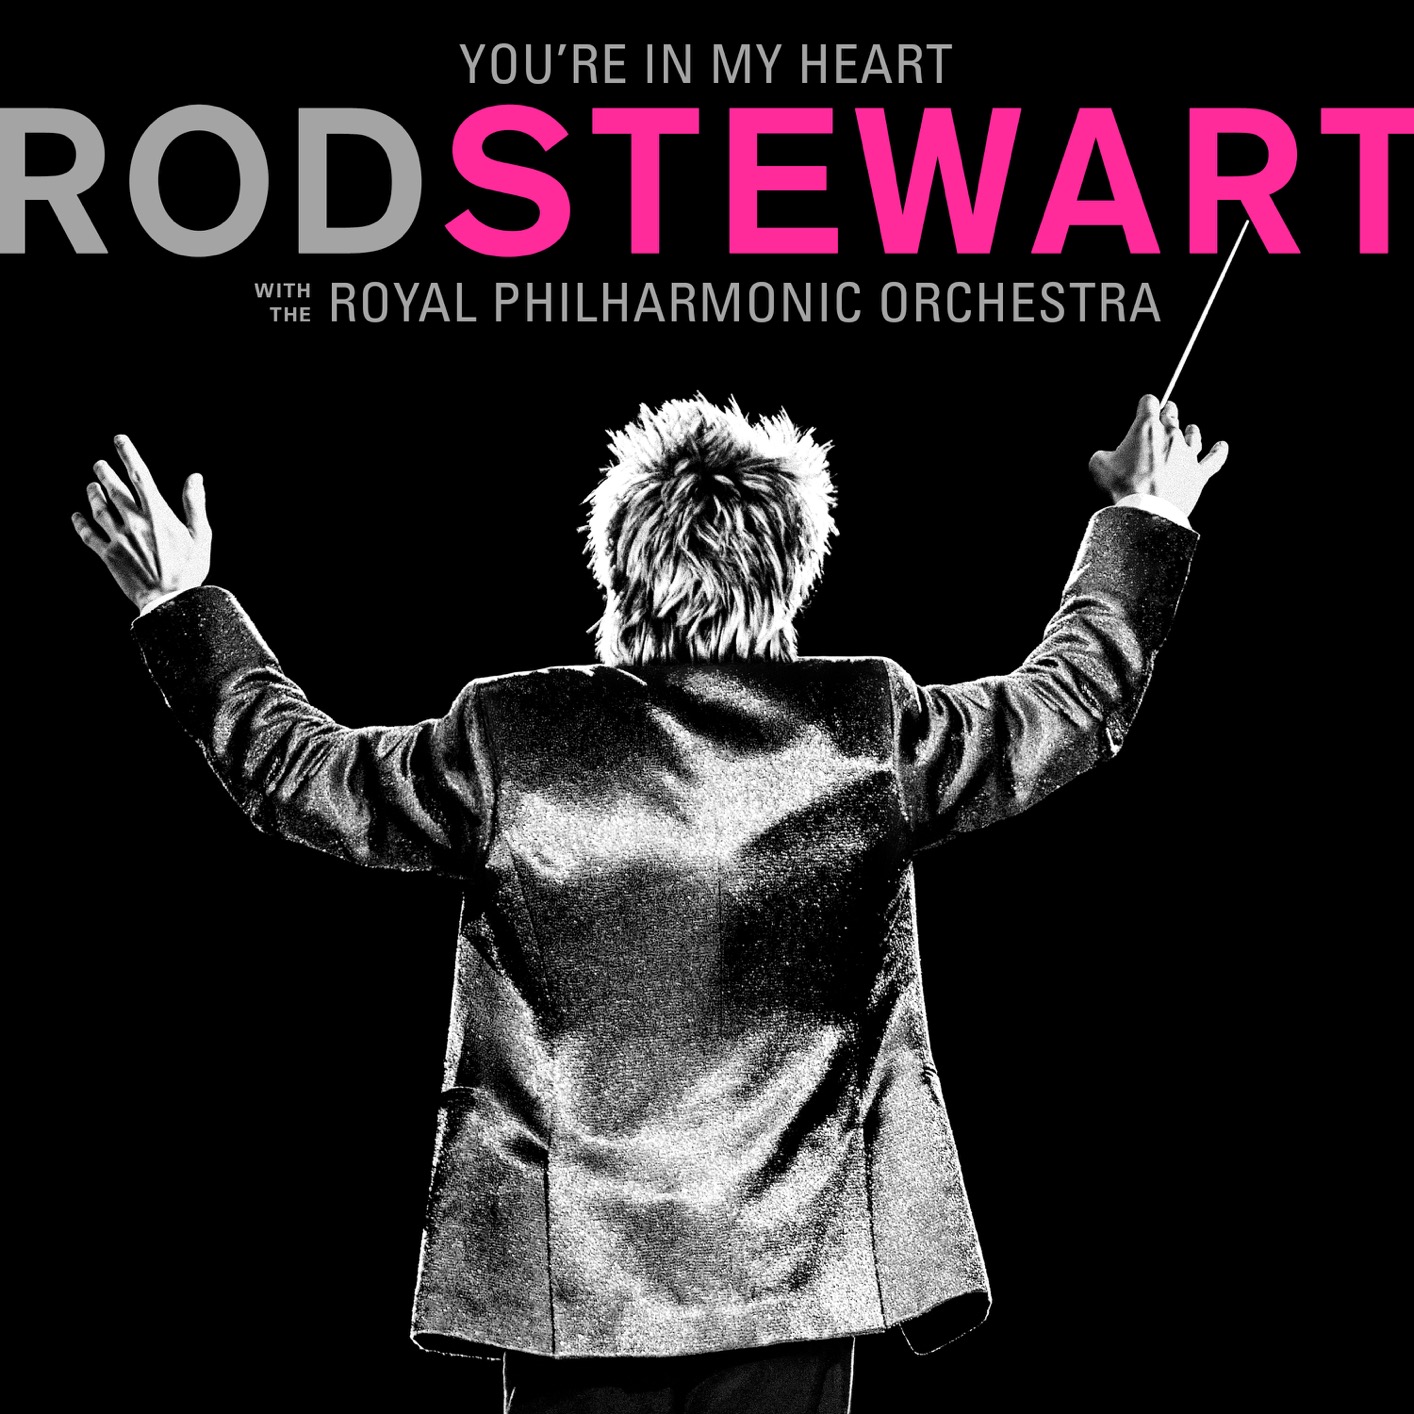 Rod Stewart - You’re In My Heart: Rod Stewart (with The Royal Philharmonic Orchestra) (2019) [FLAC 24bit/96kHz]